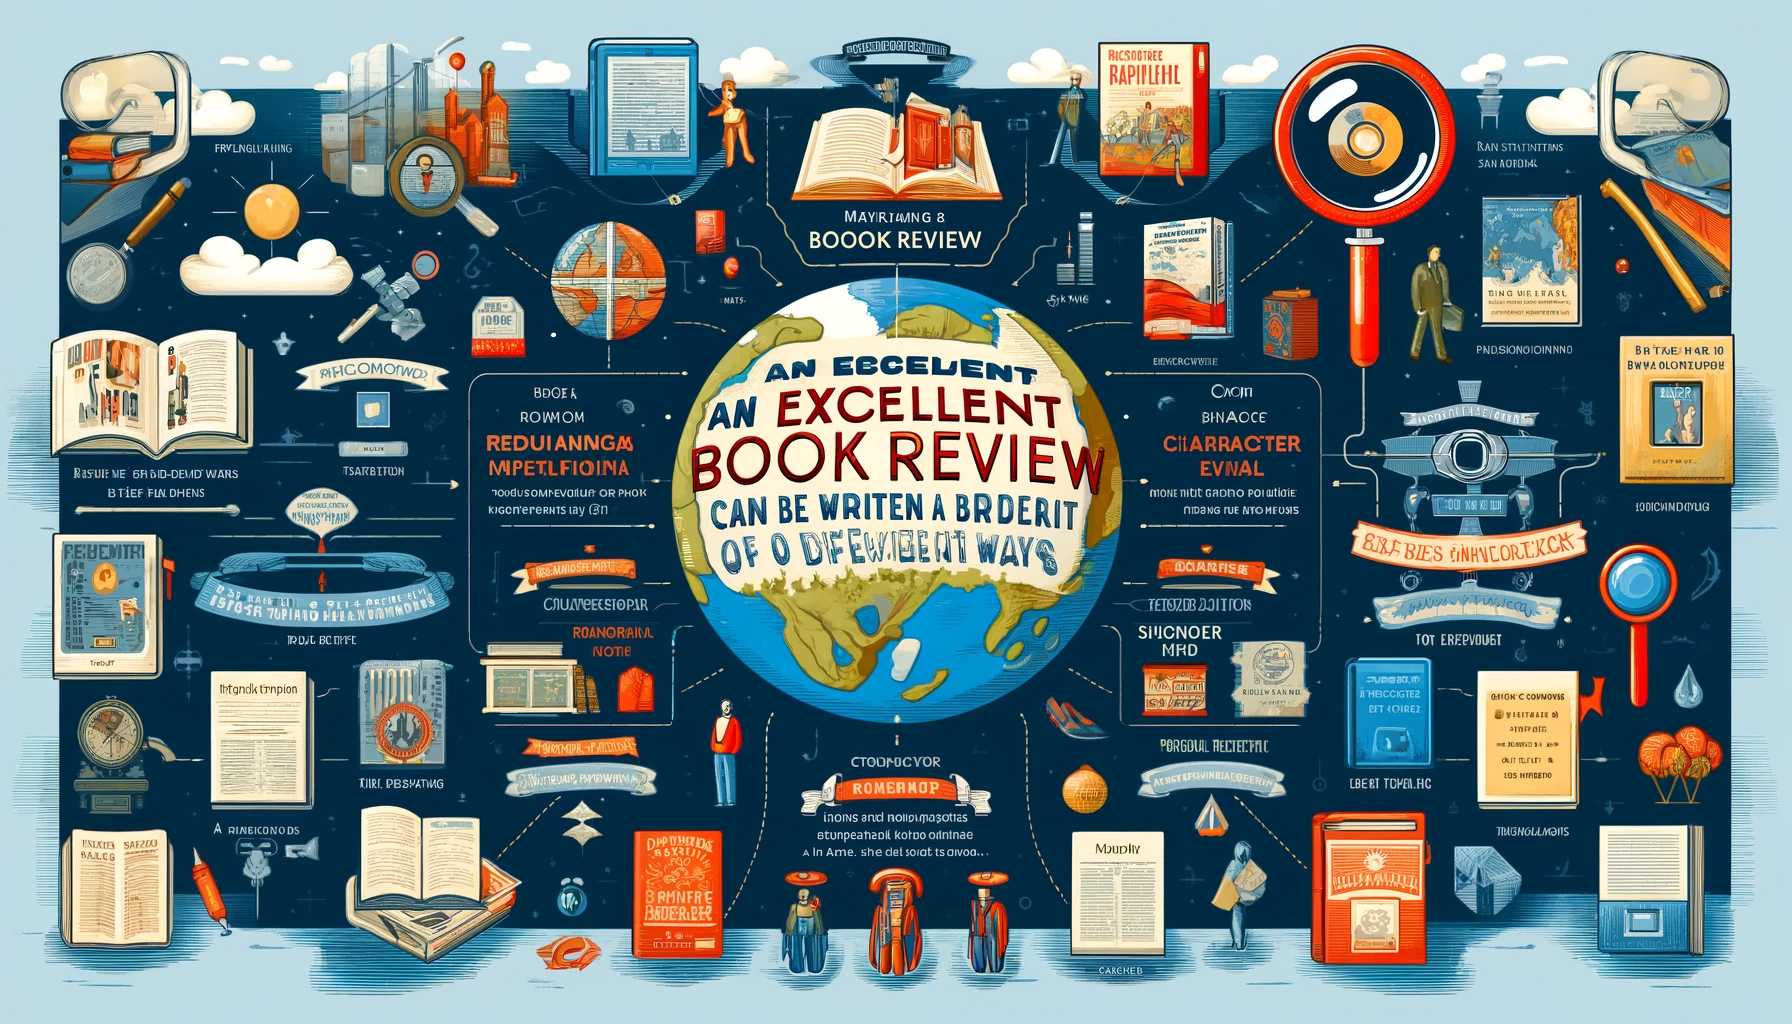 AN EXCELLENT BOOK REVIEW CAN BE WRITTEN IN A LOT OF DIFFERENT WAYS.